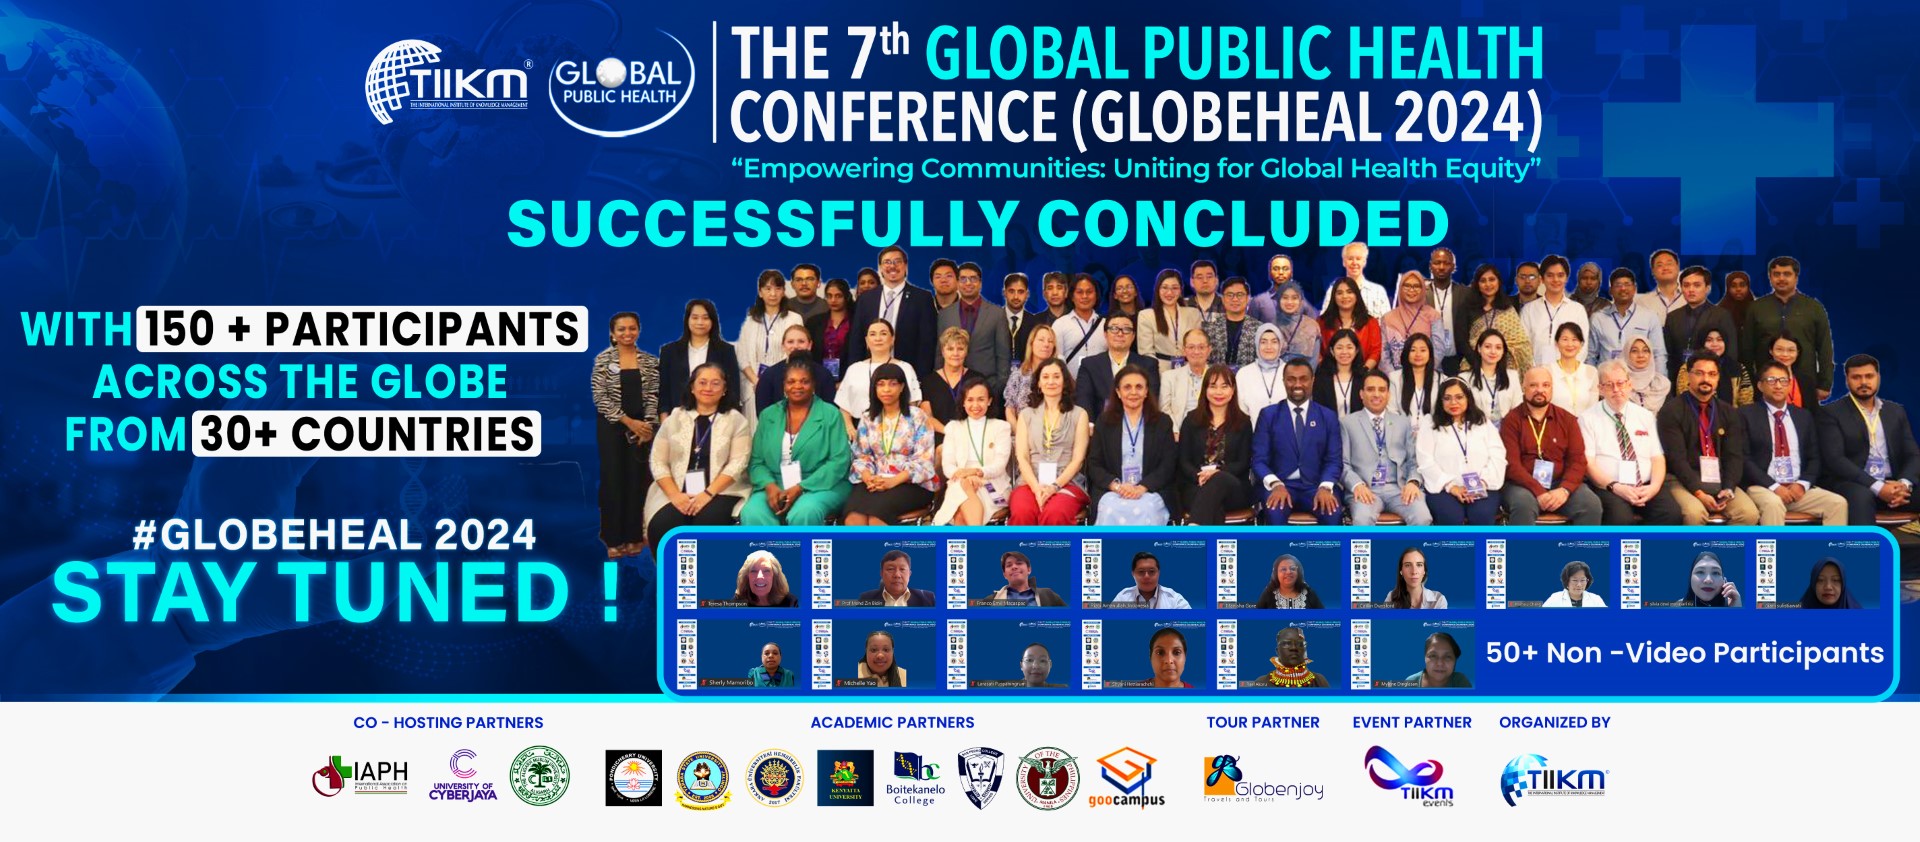 The Success Story of the 7th Global Public Health Conference (GLOBEHEAL 2024)